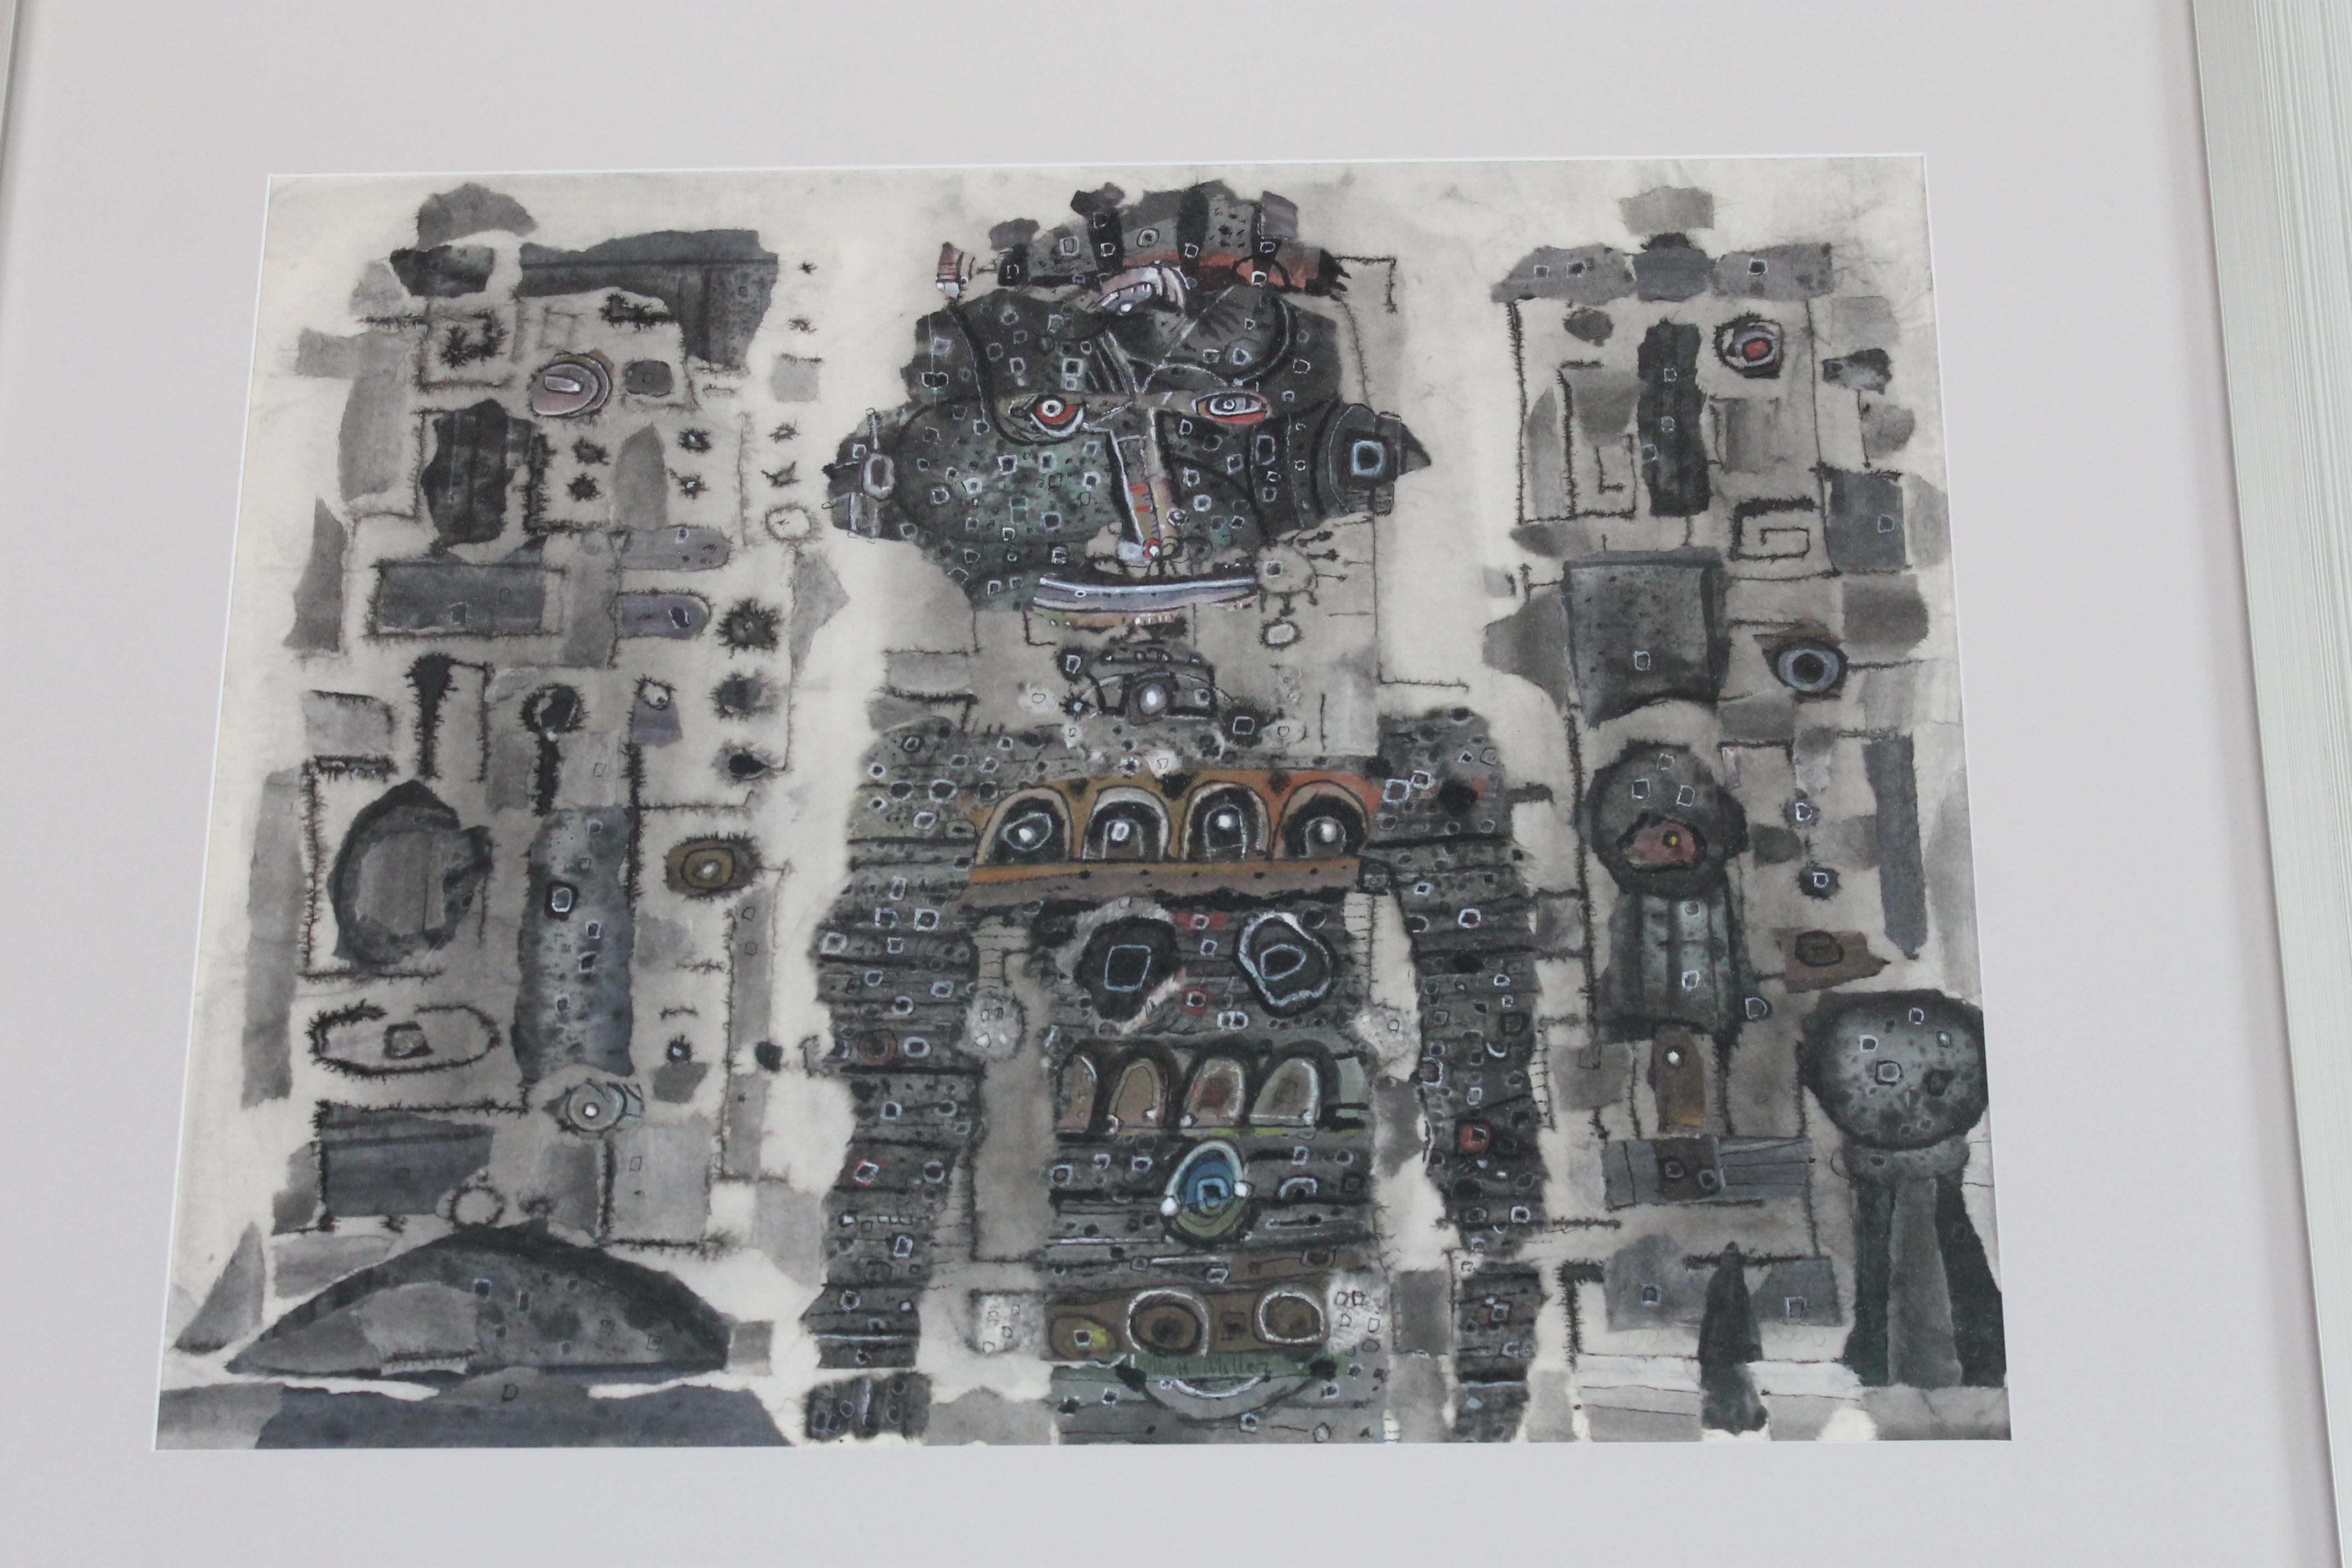 Mixed-media on paper by Dan Miller, mostly shades of grey with blue, red and gold overtones. White highlights on center robot's face give this a tribal feel. Art work size is 18.5